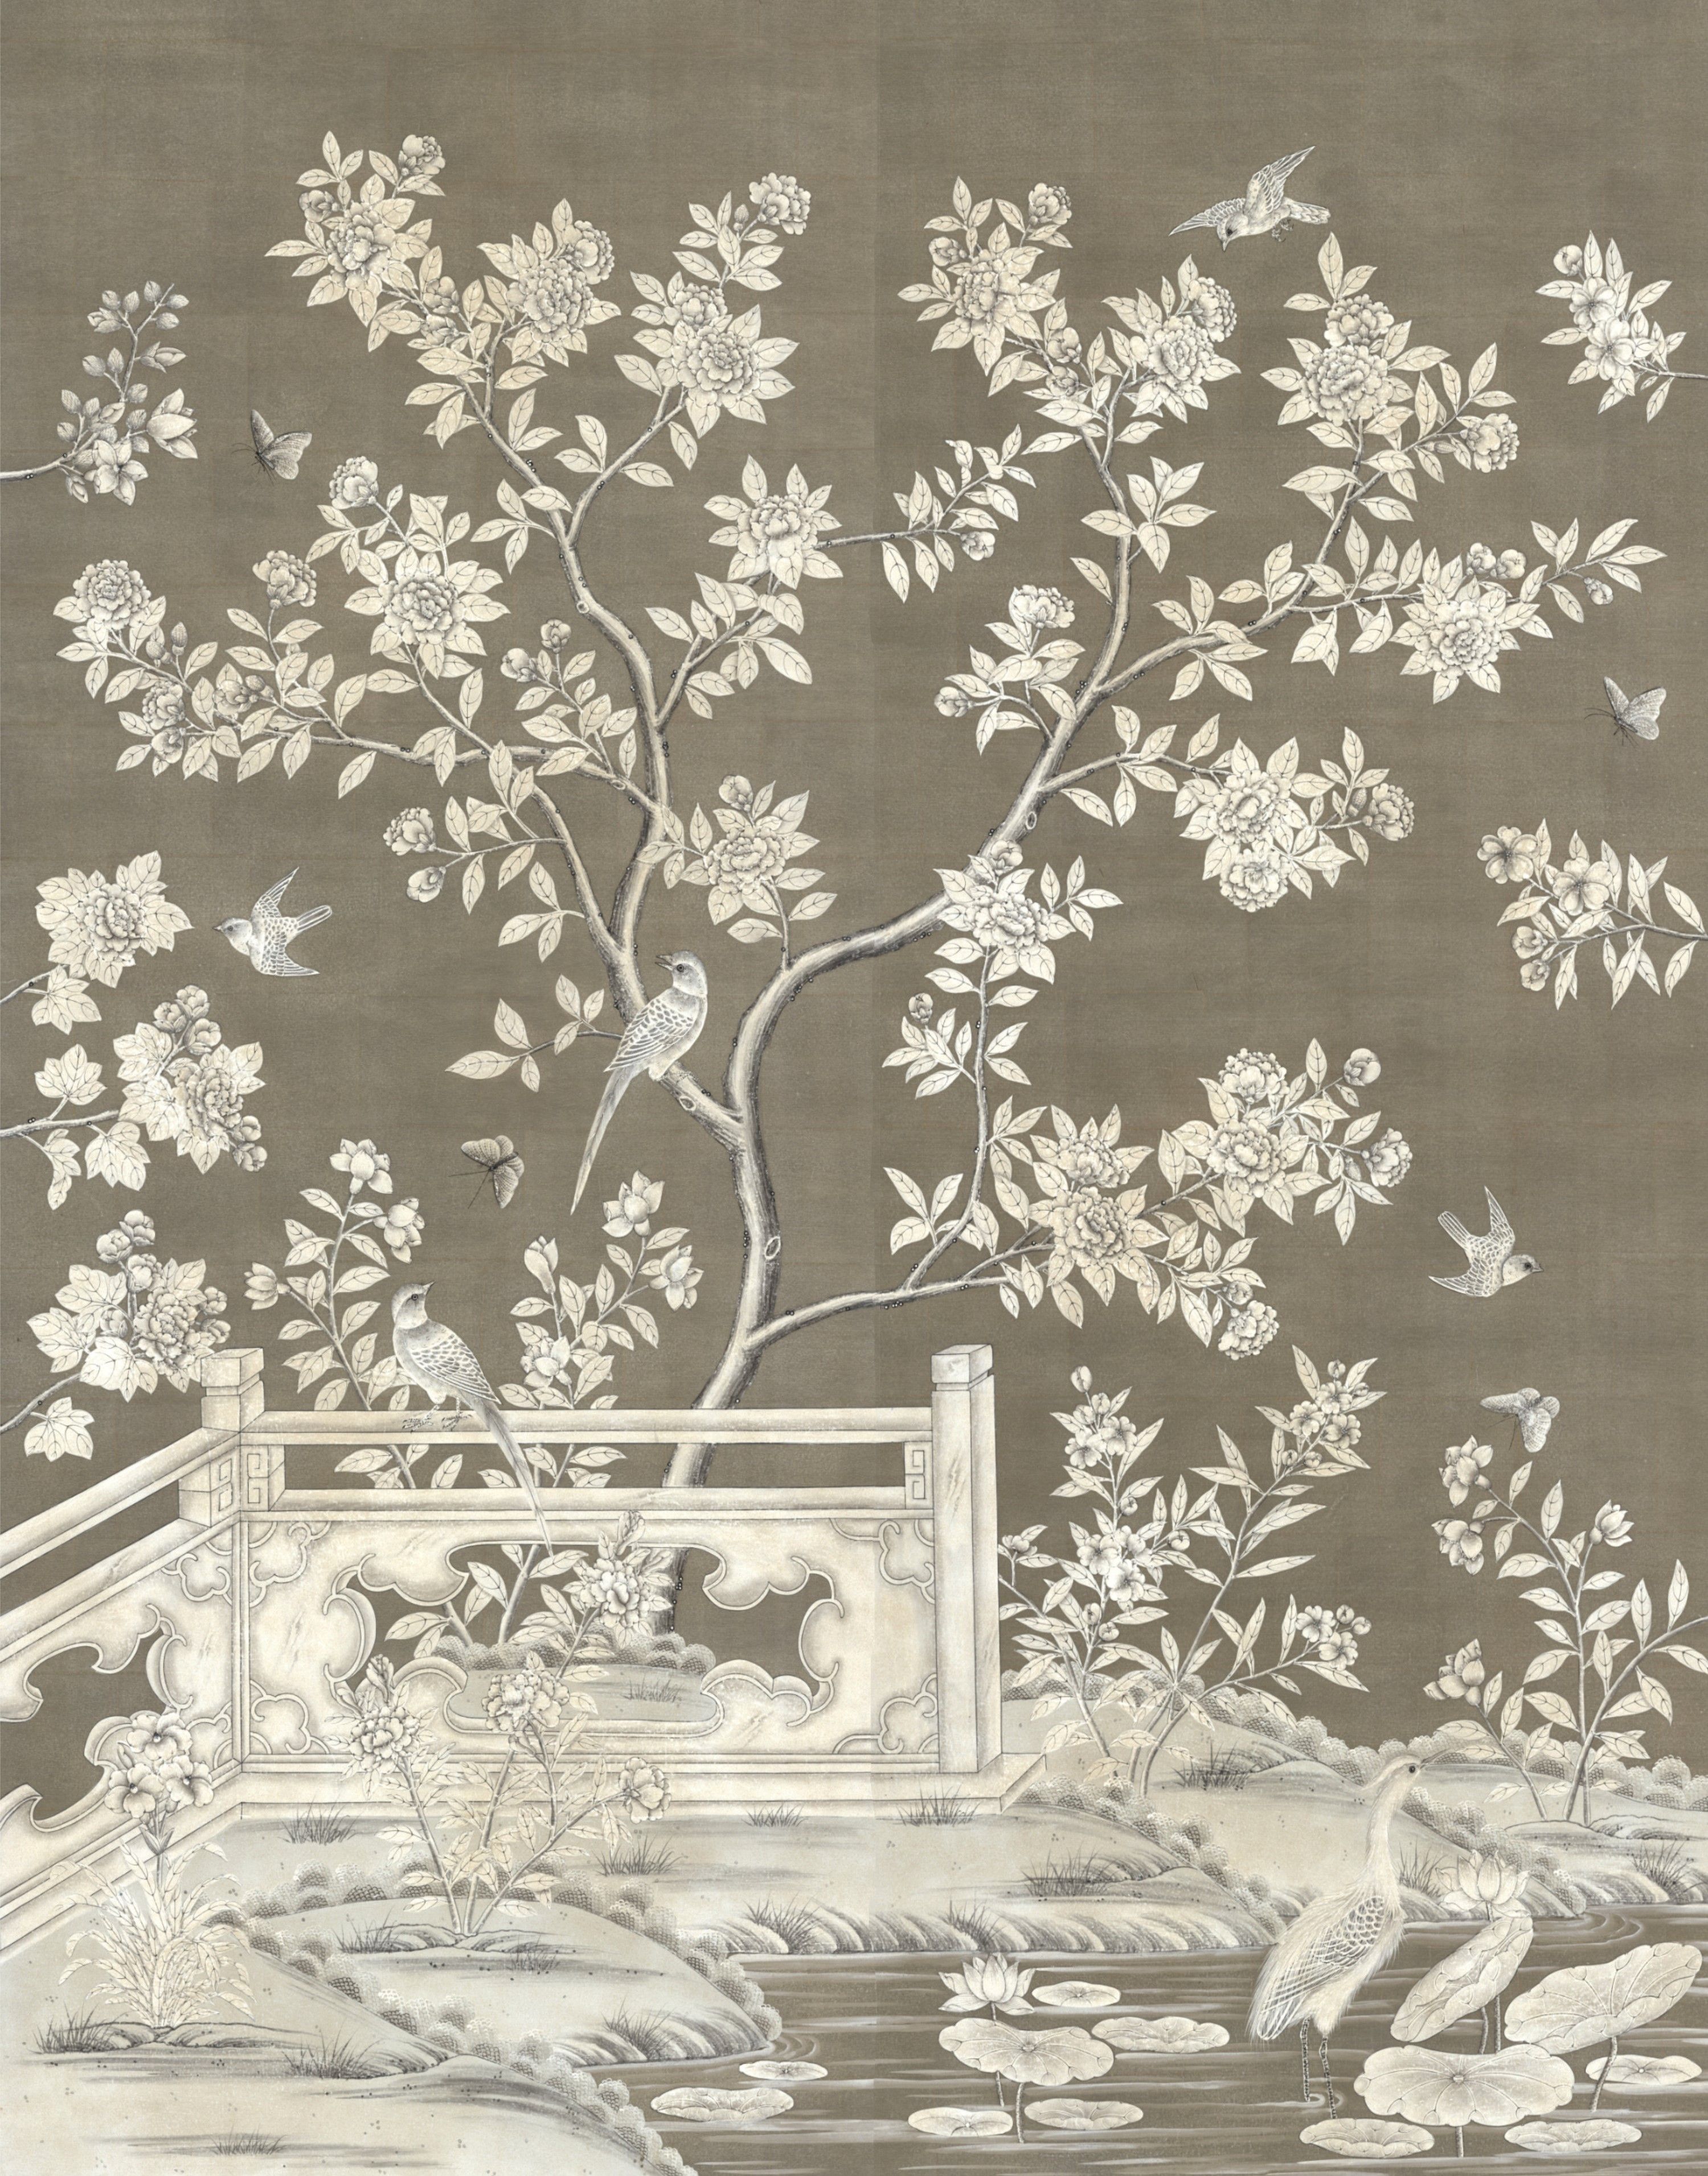 Chinese Wallpaper with Gracie - Magnifissance